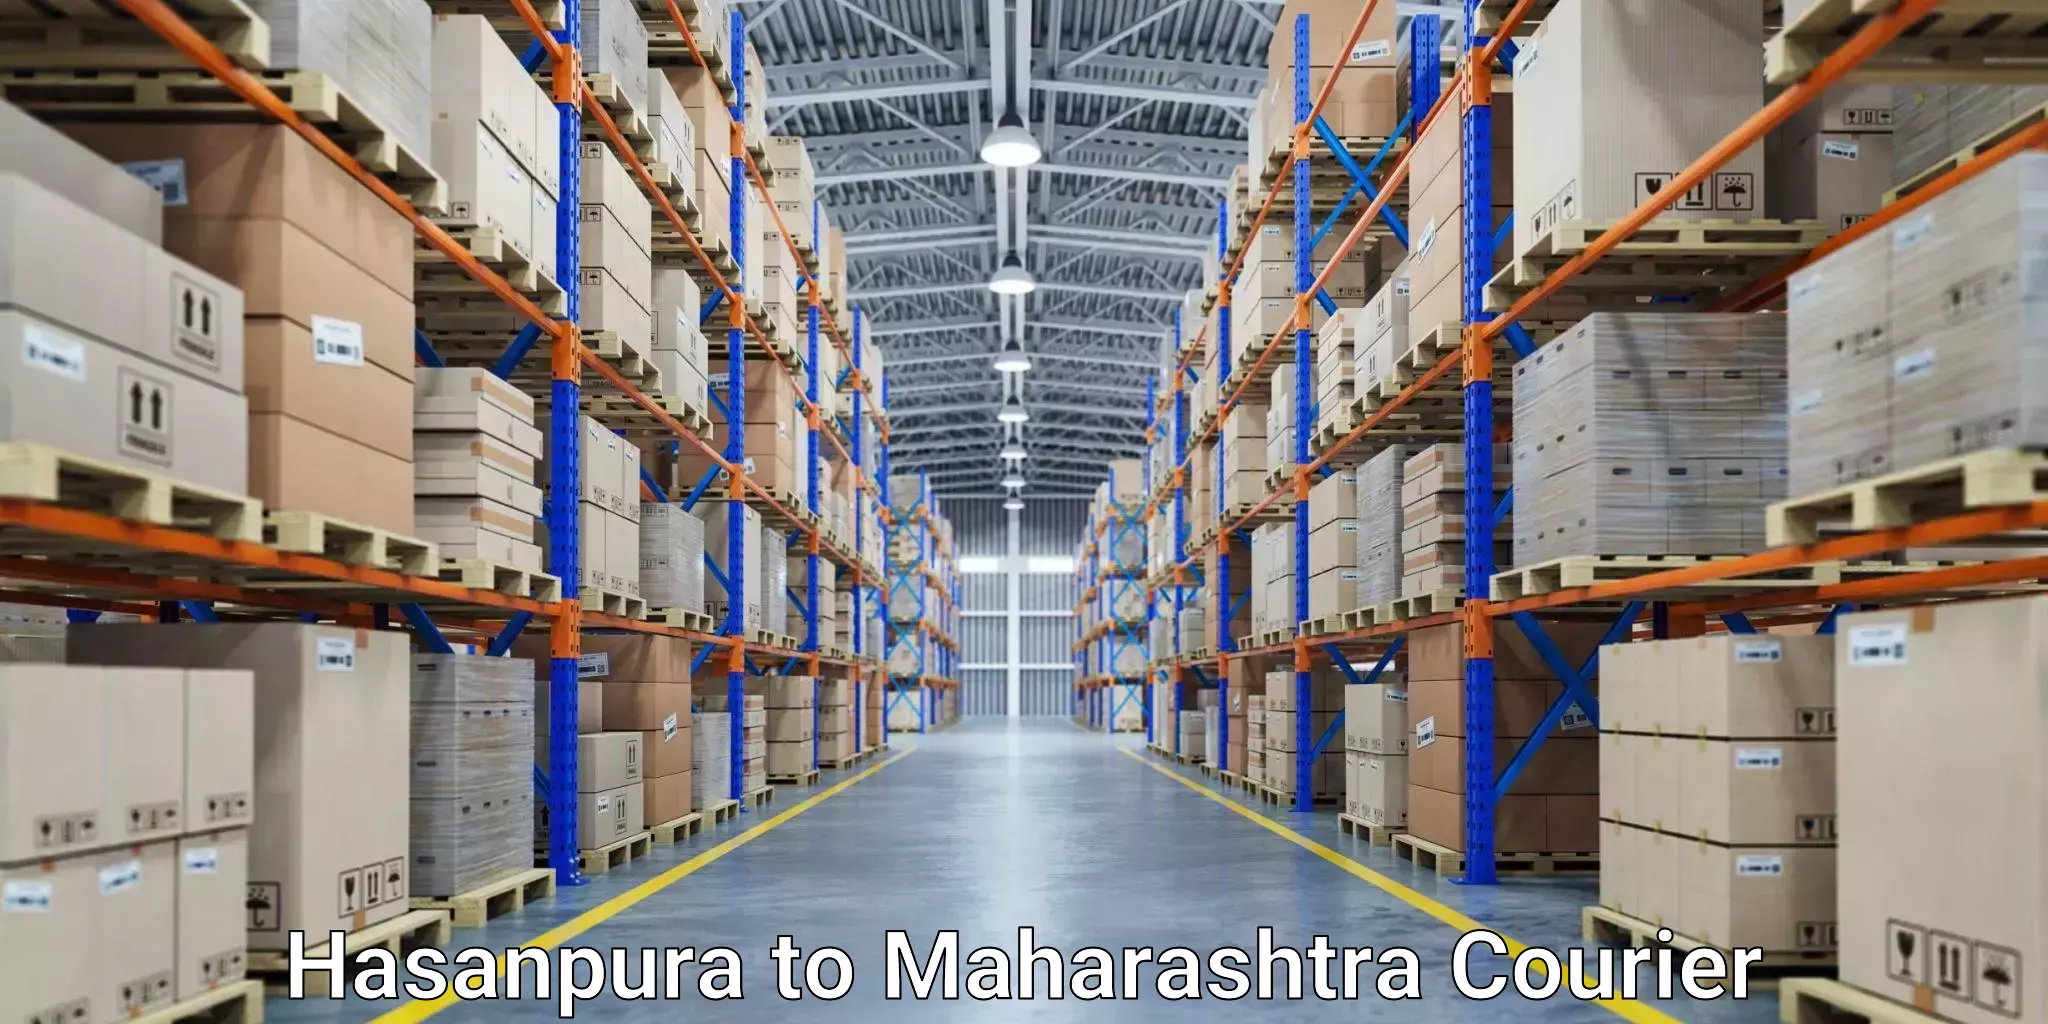 Full-service courier options in Hasanpura to IIIT Nagpur